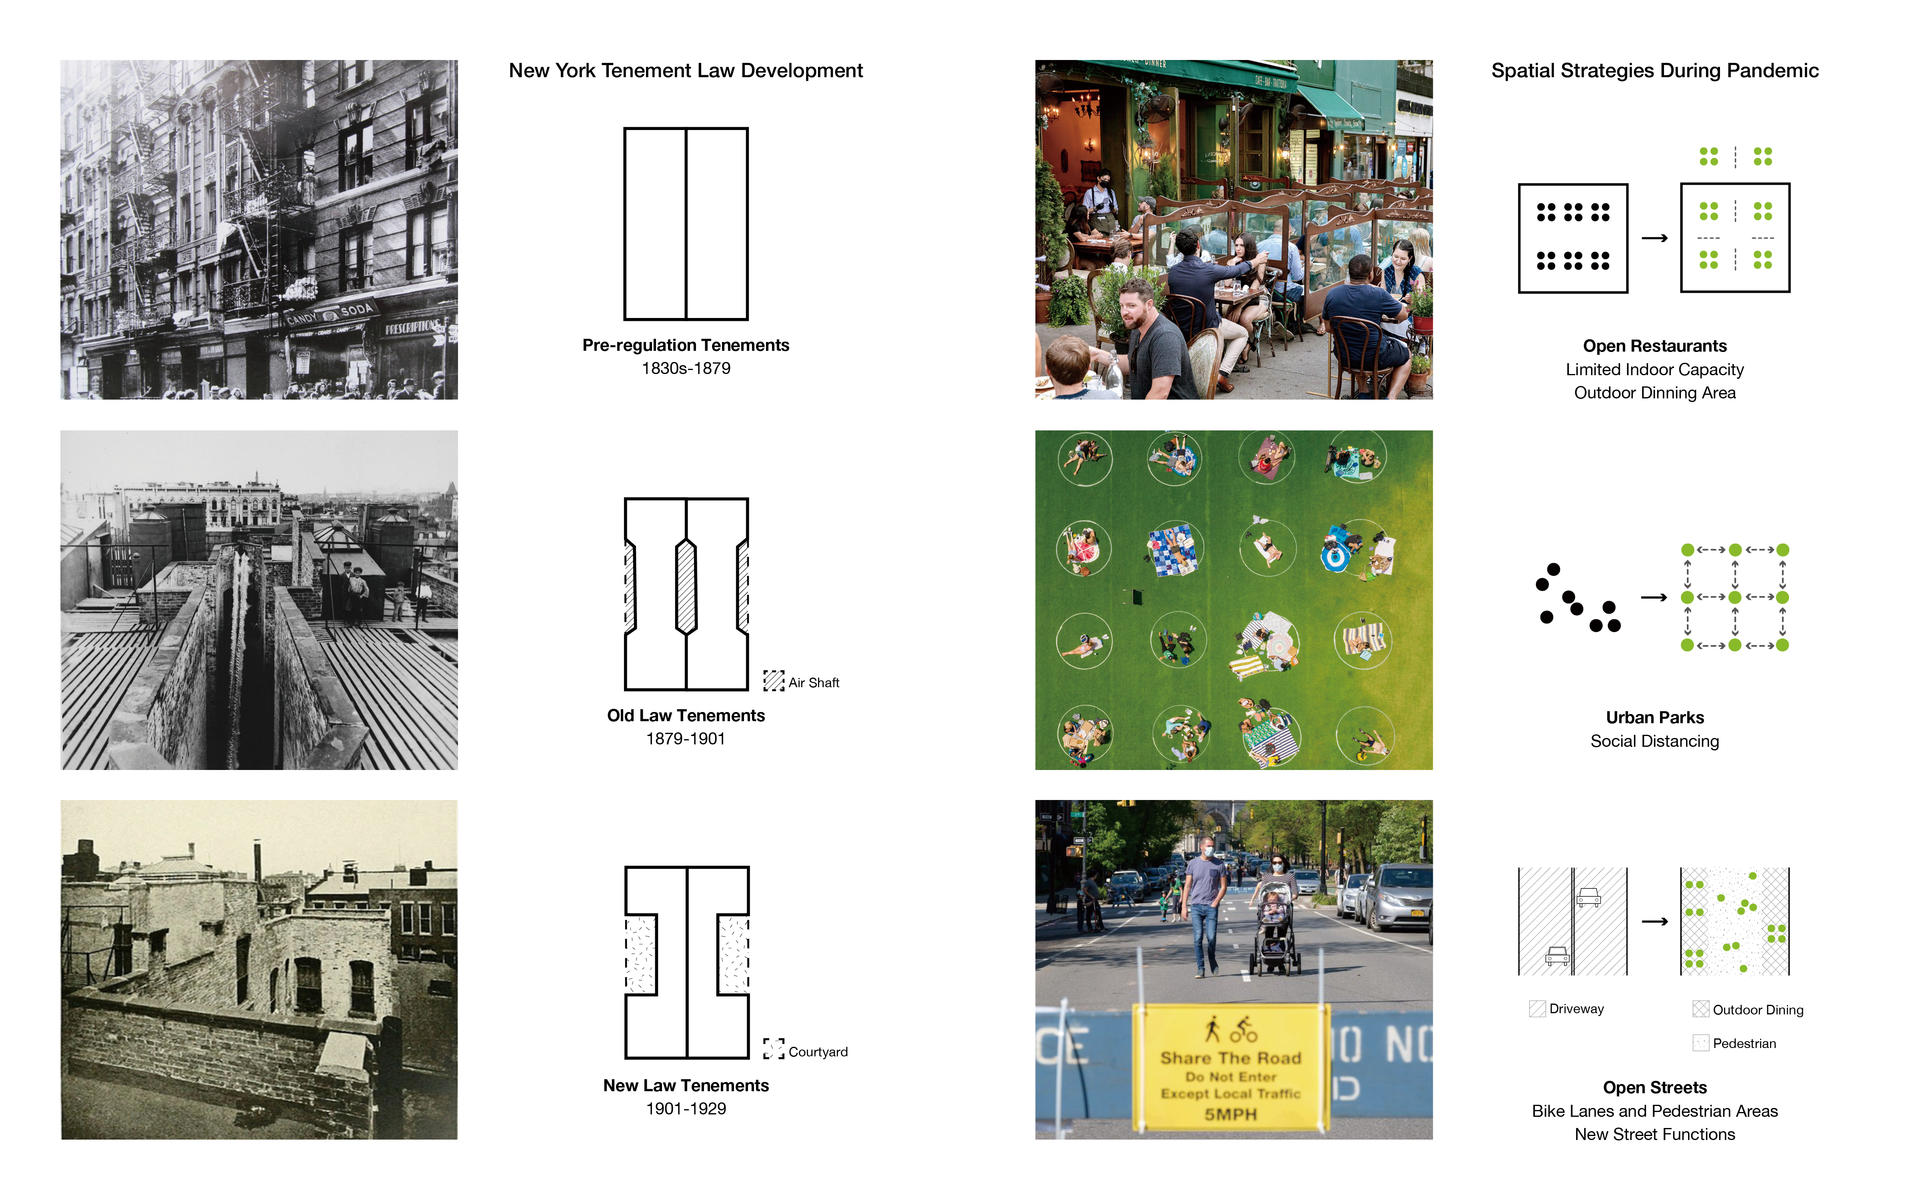 A series of photos and diagrams showing the development of New York Tenement Law development, and the main design strategies for urban open space in response to COVID-19 pandemic.